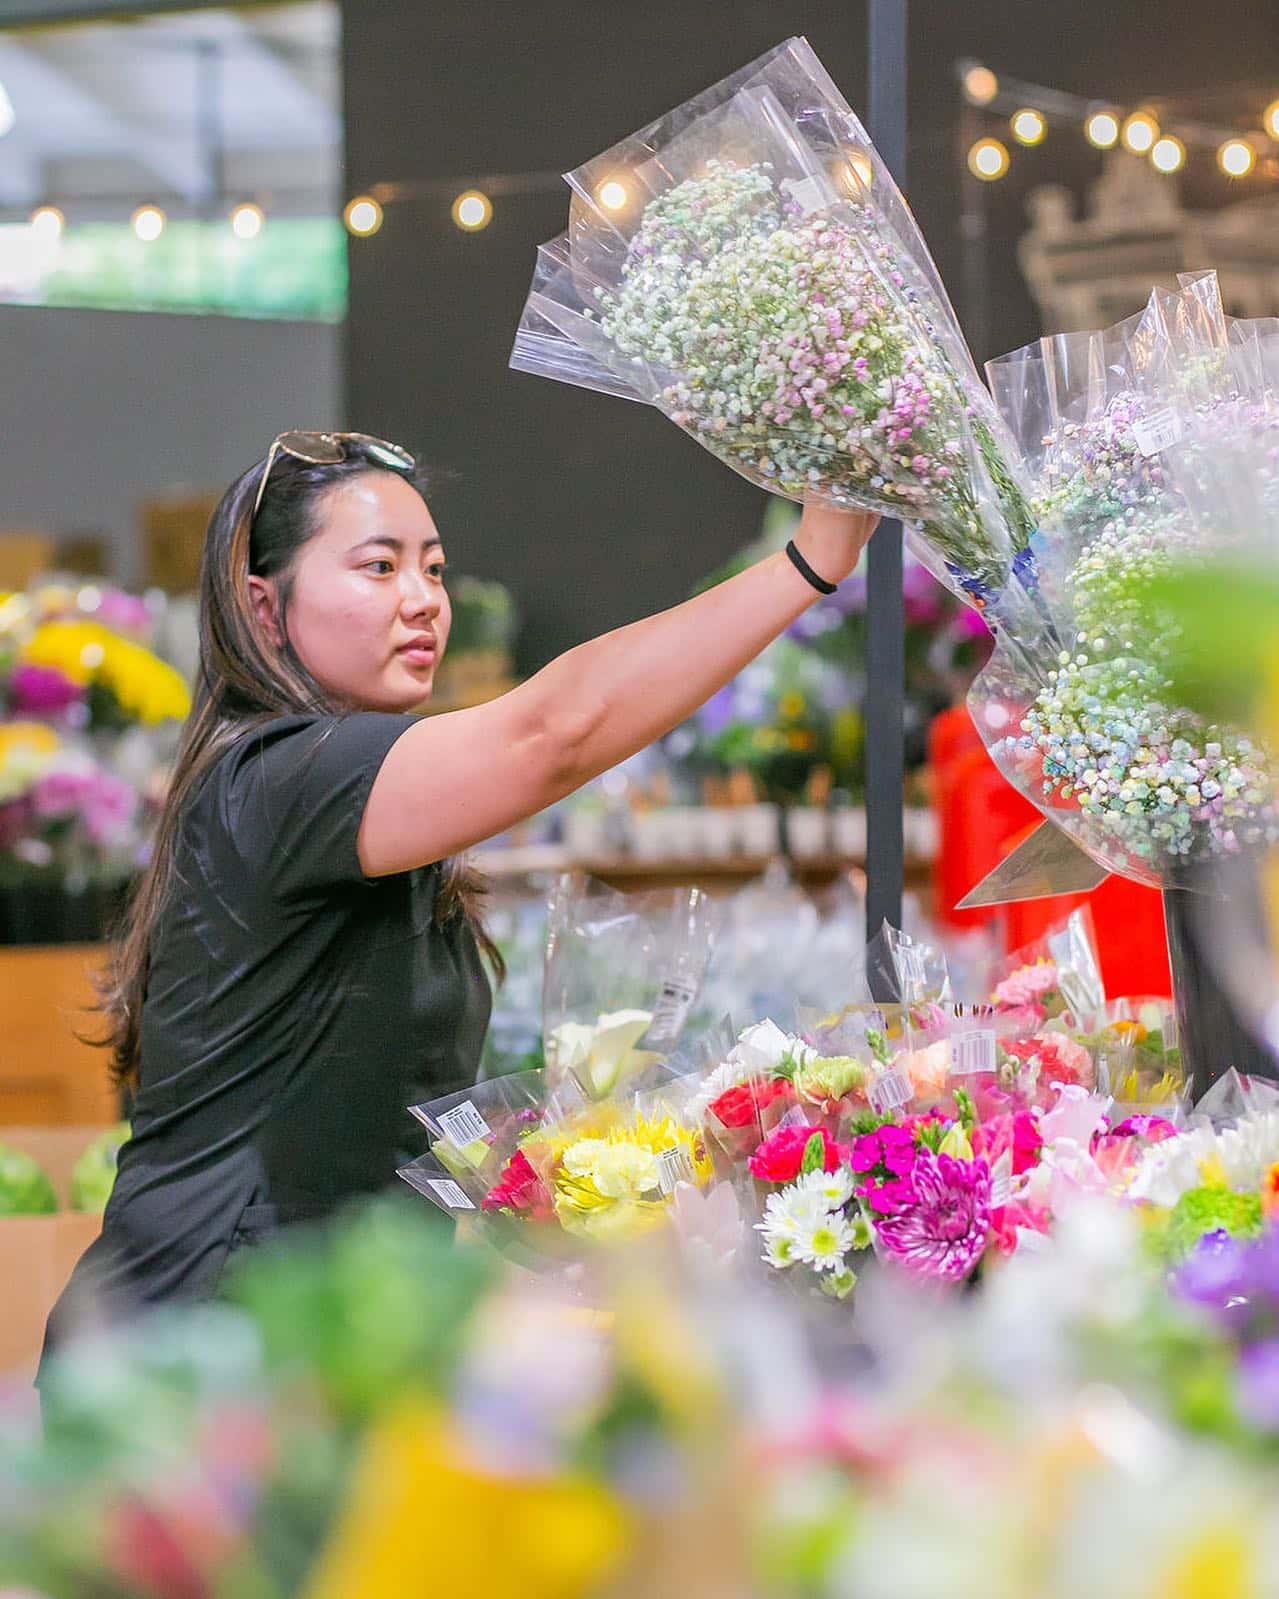 Our favorite weekly ritual is snagging a fresh bouquet from Trader Joe's while we're getting our grocery shopping done   We need some help with our list though - drop your recent Trader Joe's favs in the comments so we know what to try!